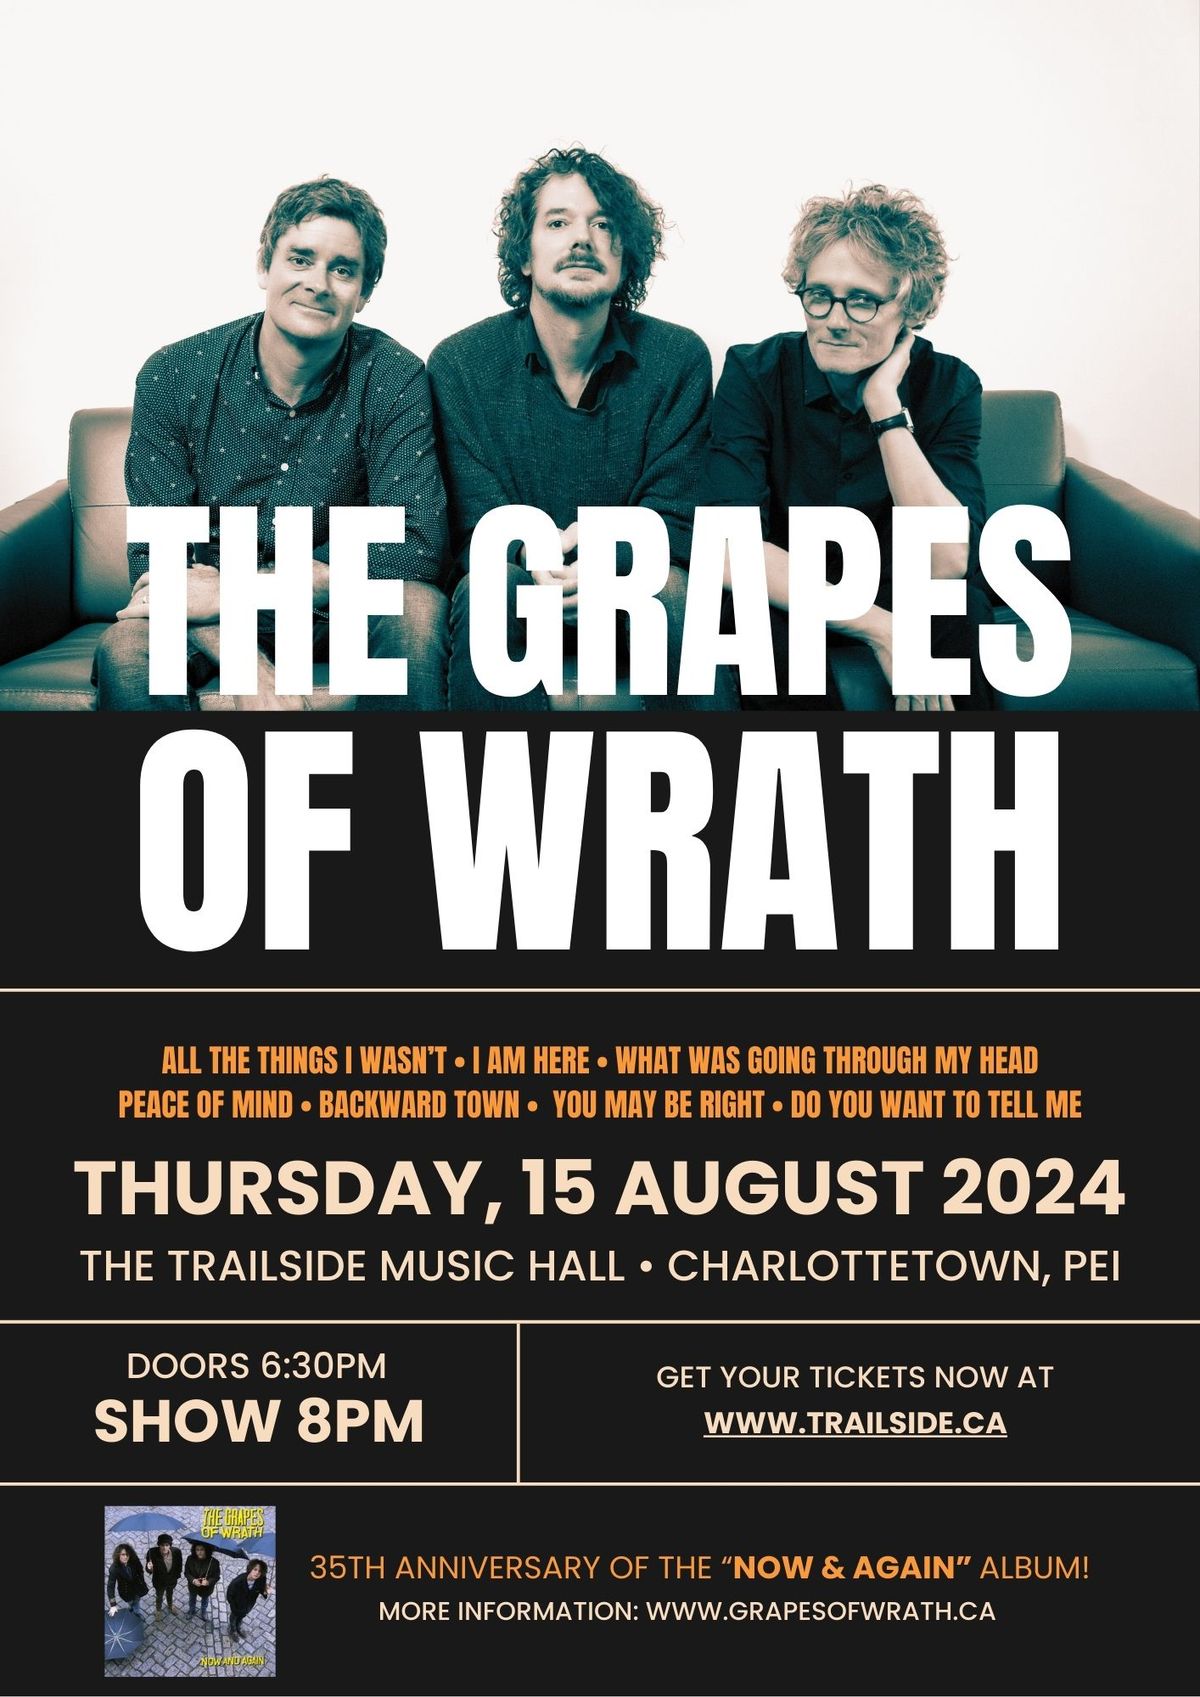 The Grapes of Wrath play Charlottetown, PEI